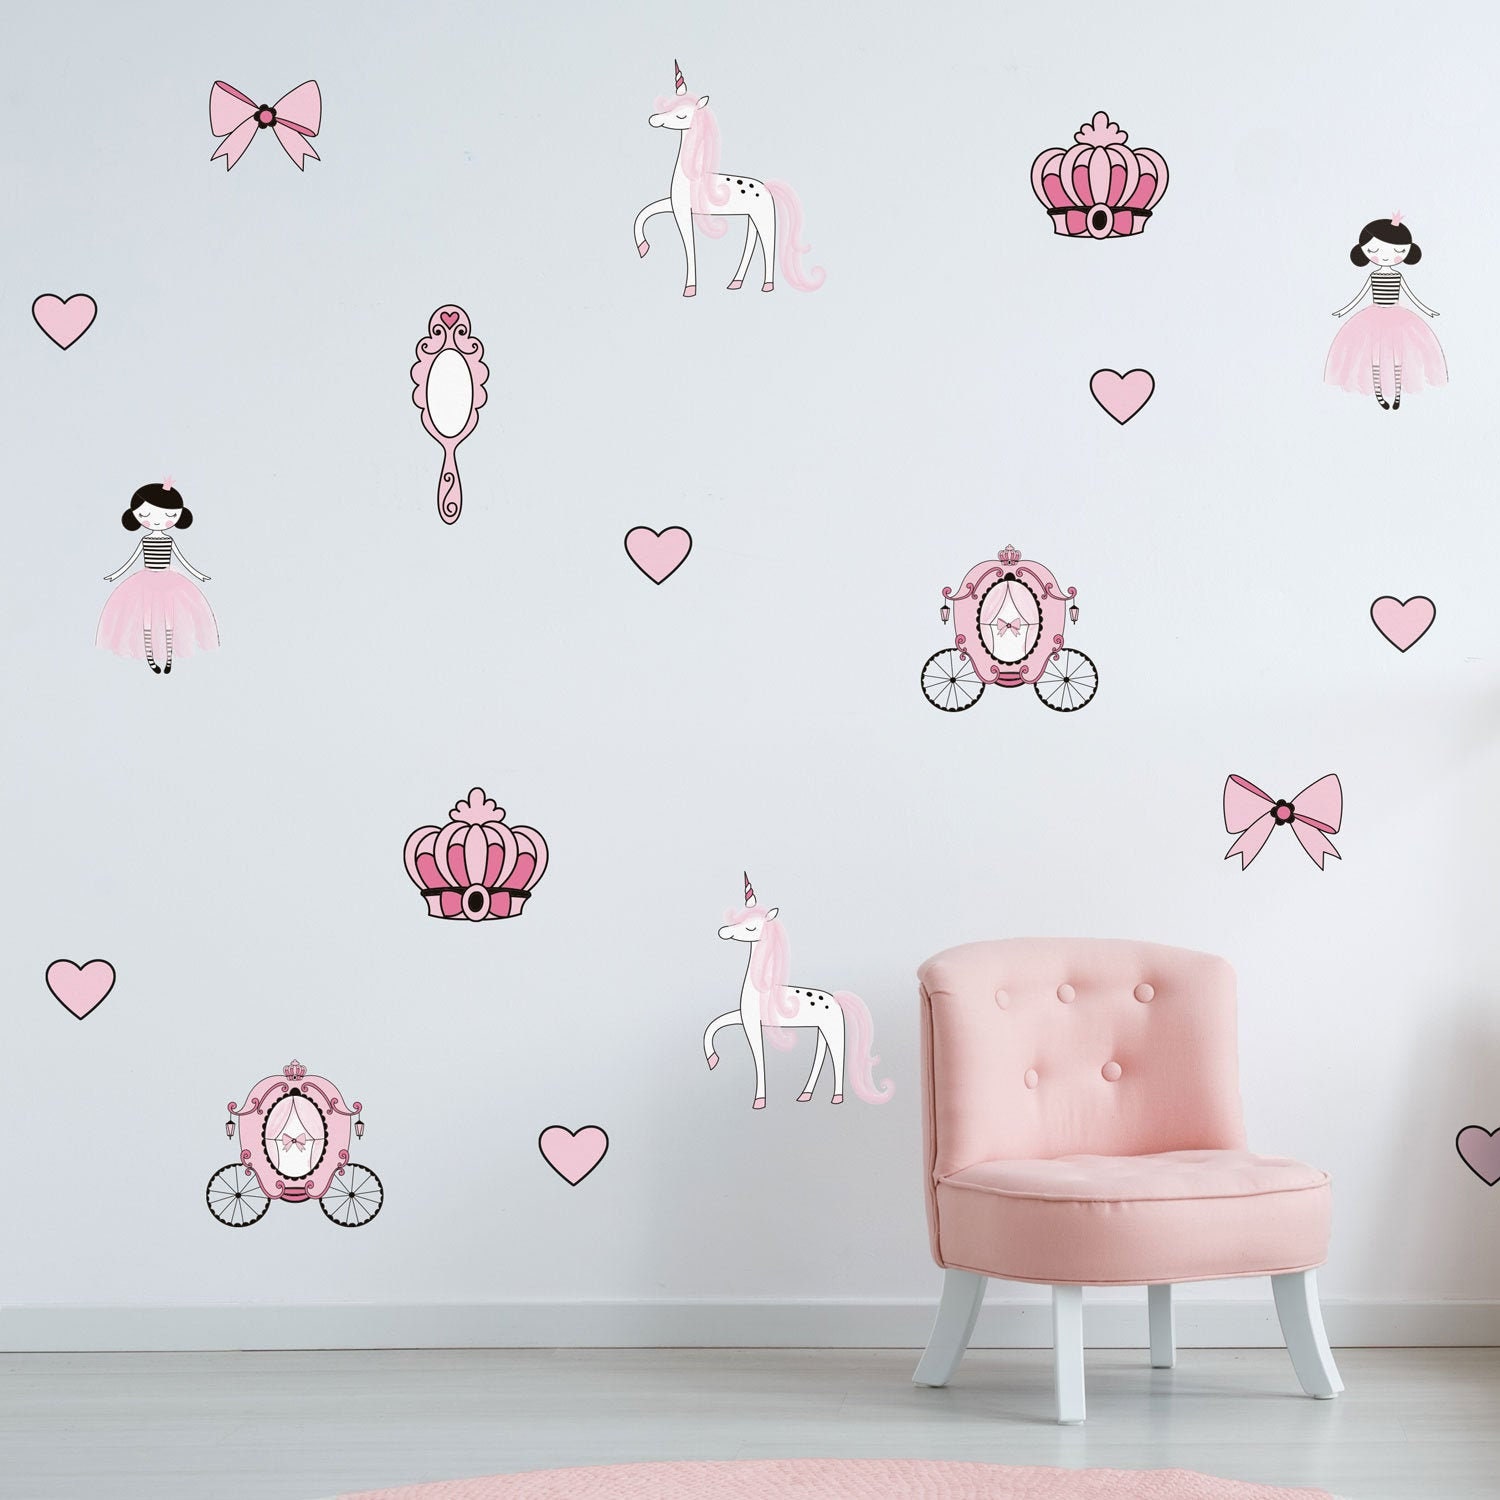 Details about   GiaNT PRINCESS WALL DECALS 37 Castle Carriage Fairy Unicorn Stickers Room Decor 